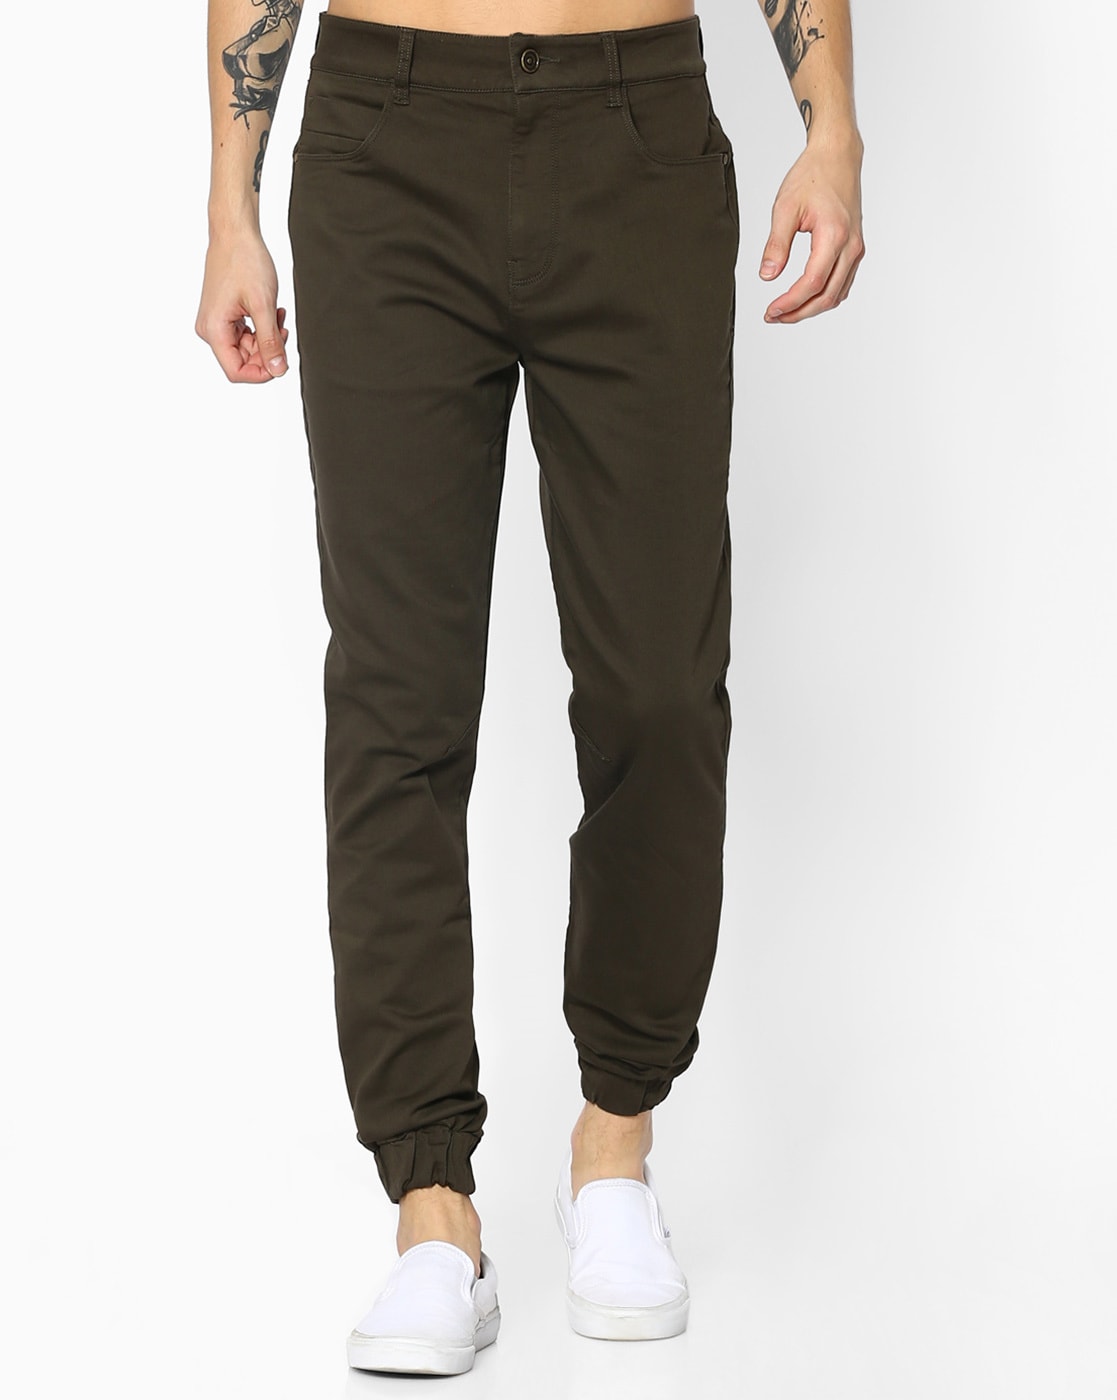 Wrangler Pants  Shop Trending Pants and Trousers Online  Fortunate One